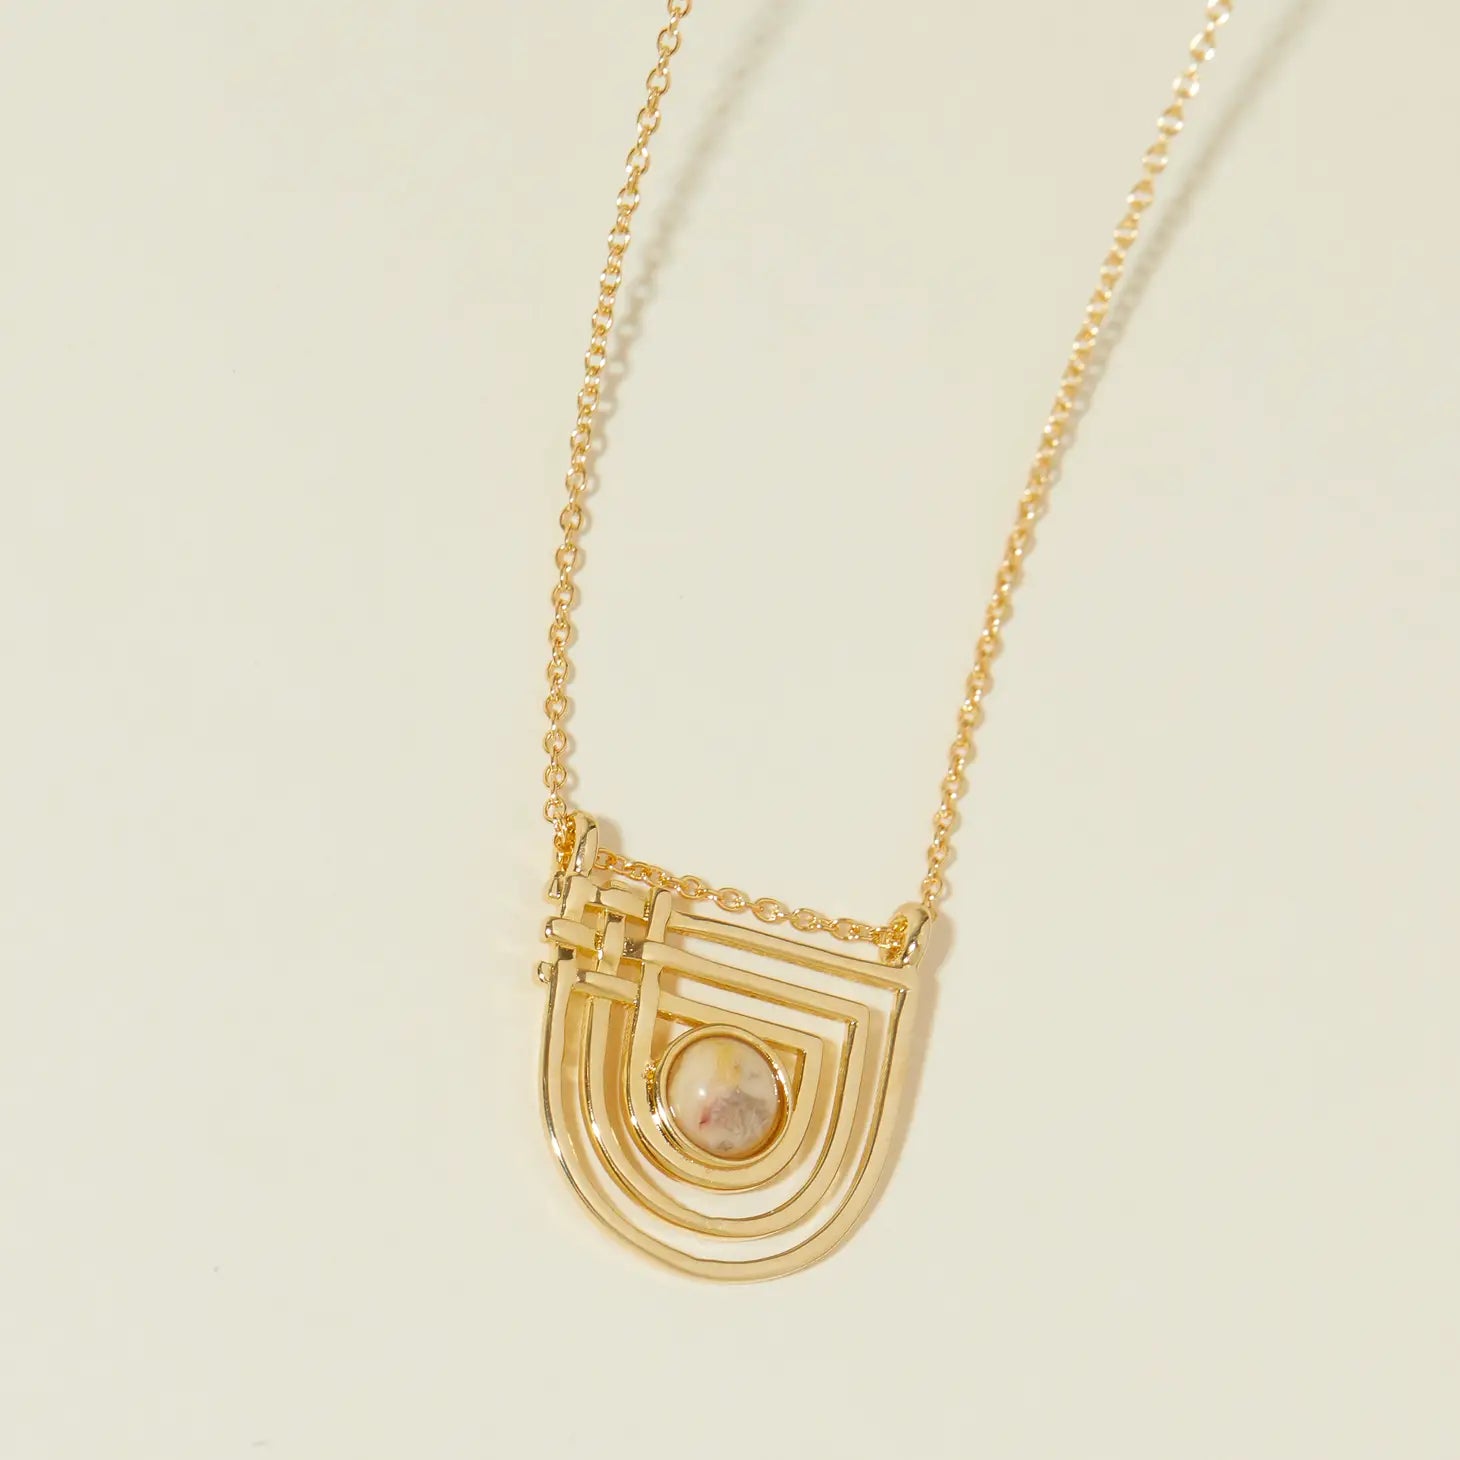 Lindsay Lewis Jewelry Golden Era Necklace - Agate | Prelude & Dawn | Los Angeles